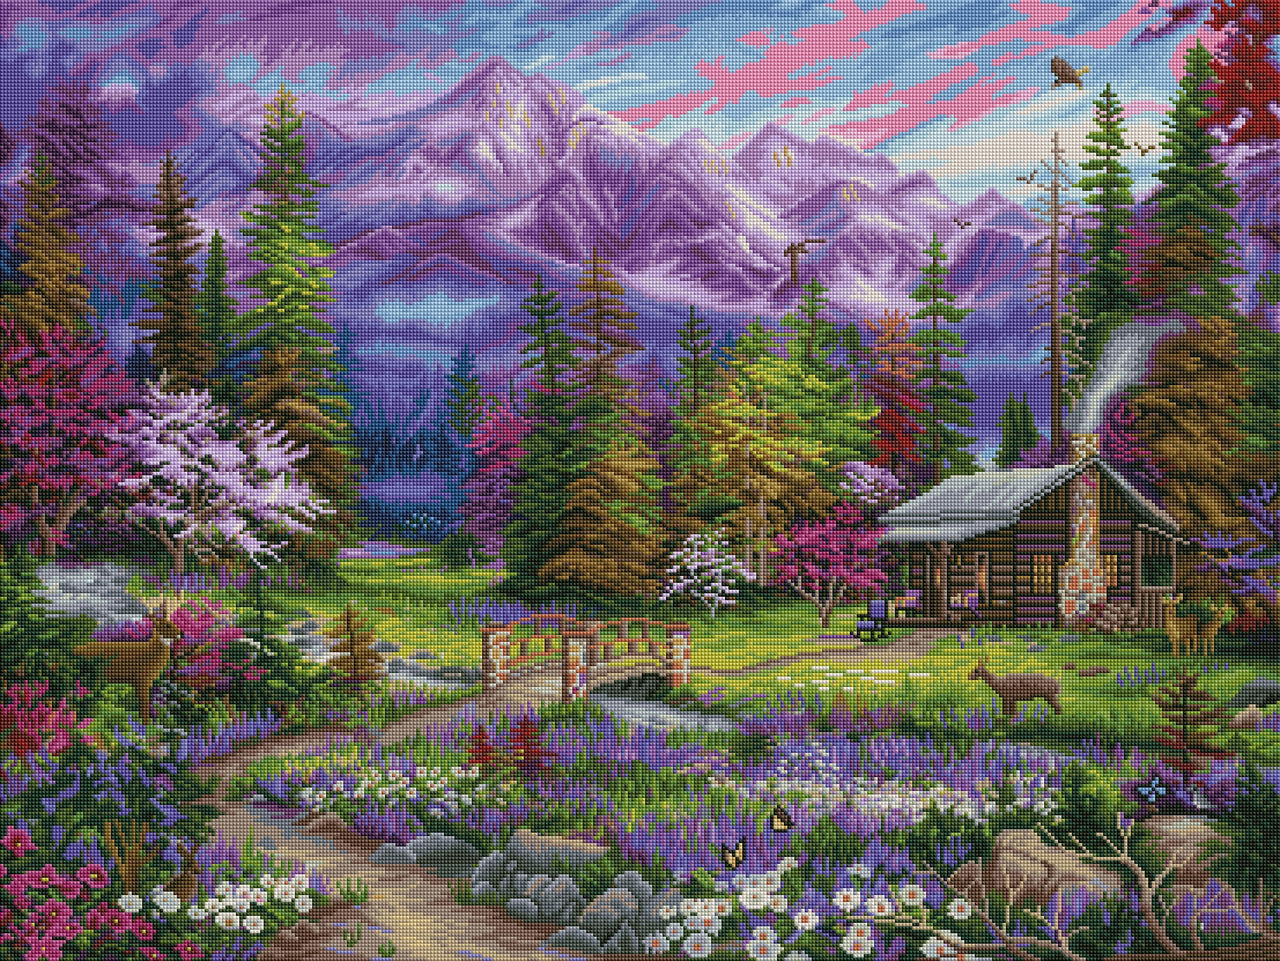 Diamond Painting Inspiration of Spring Meadows 36.6" x 27.6″ (93cm x 70cm) / Square with 54 Colors including 2 ABs / 102,214